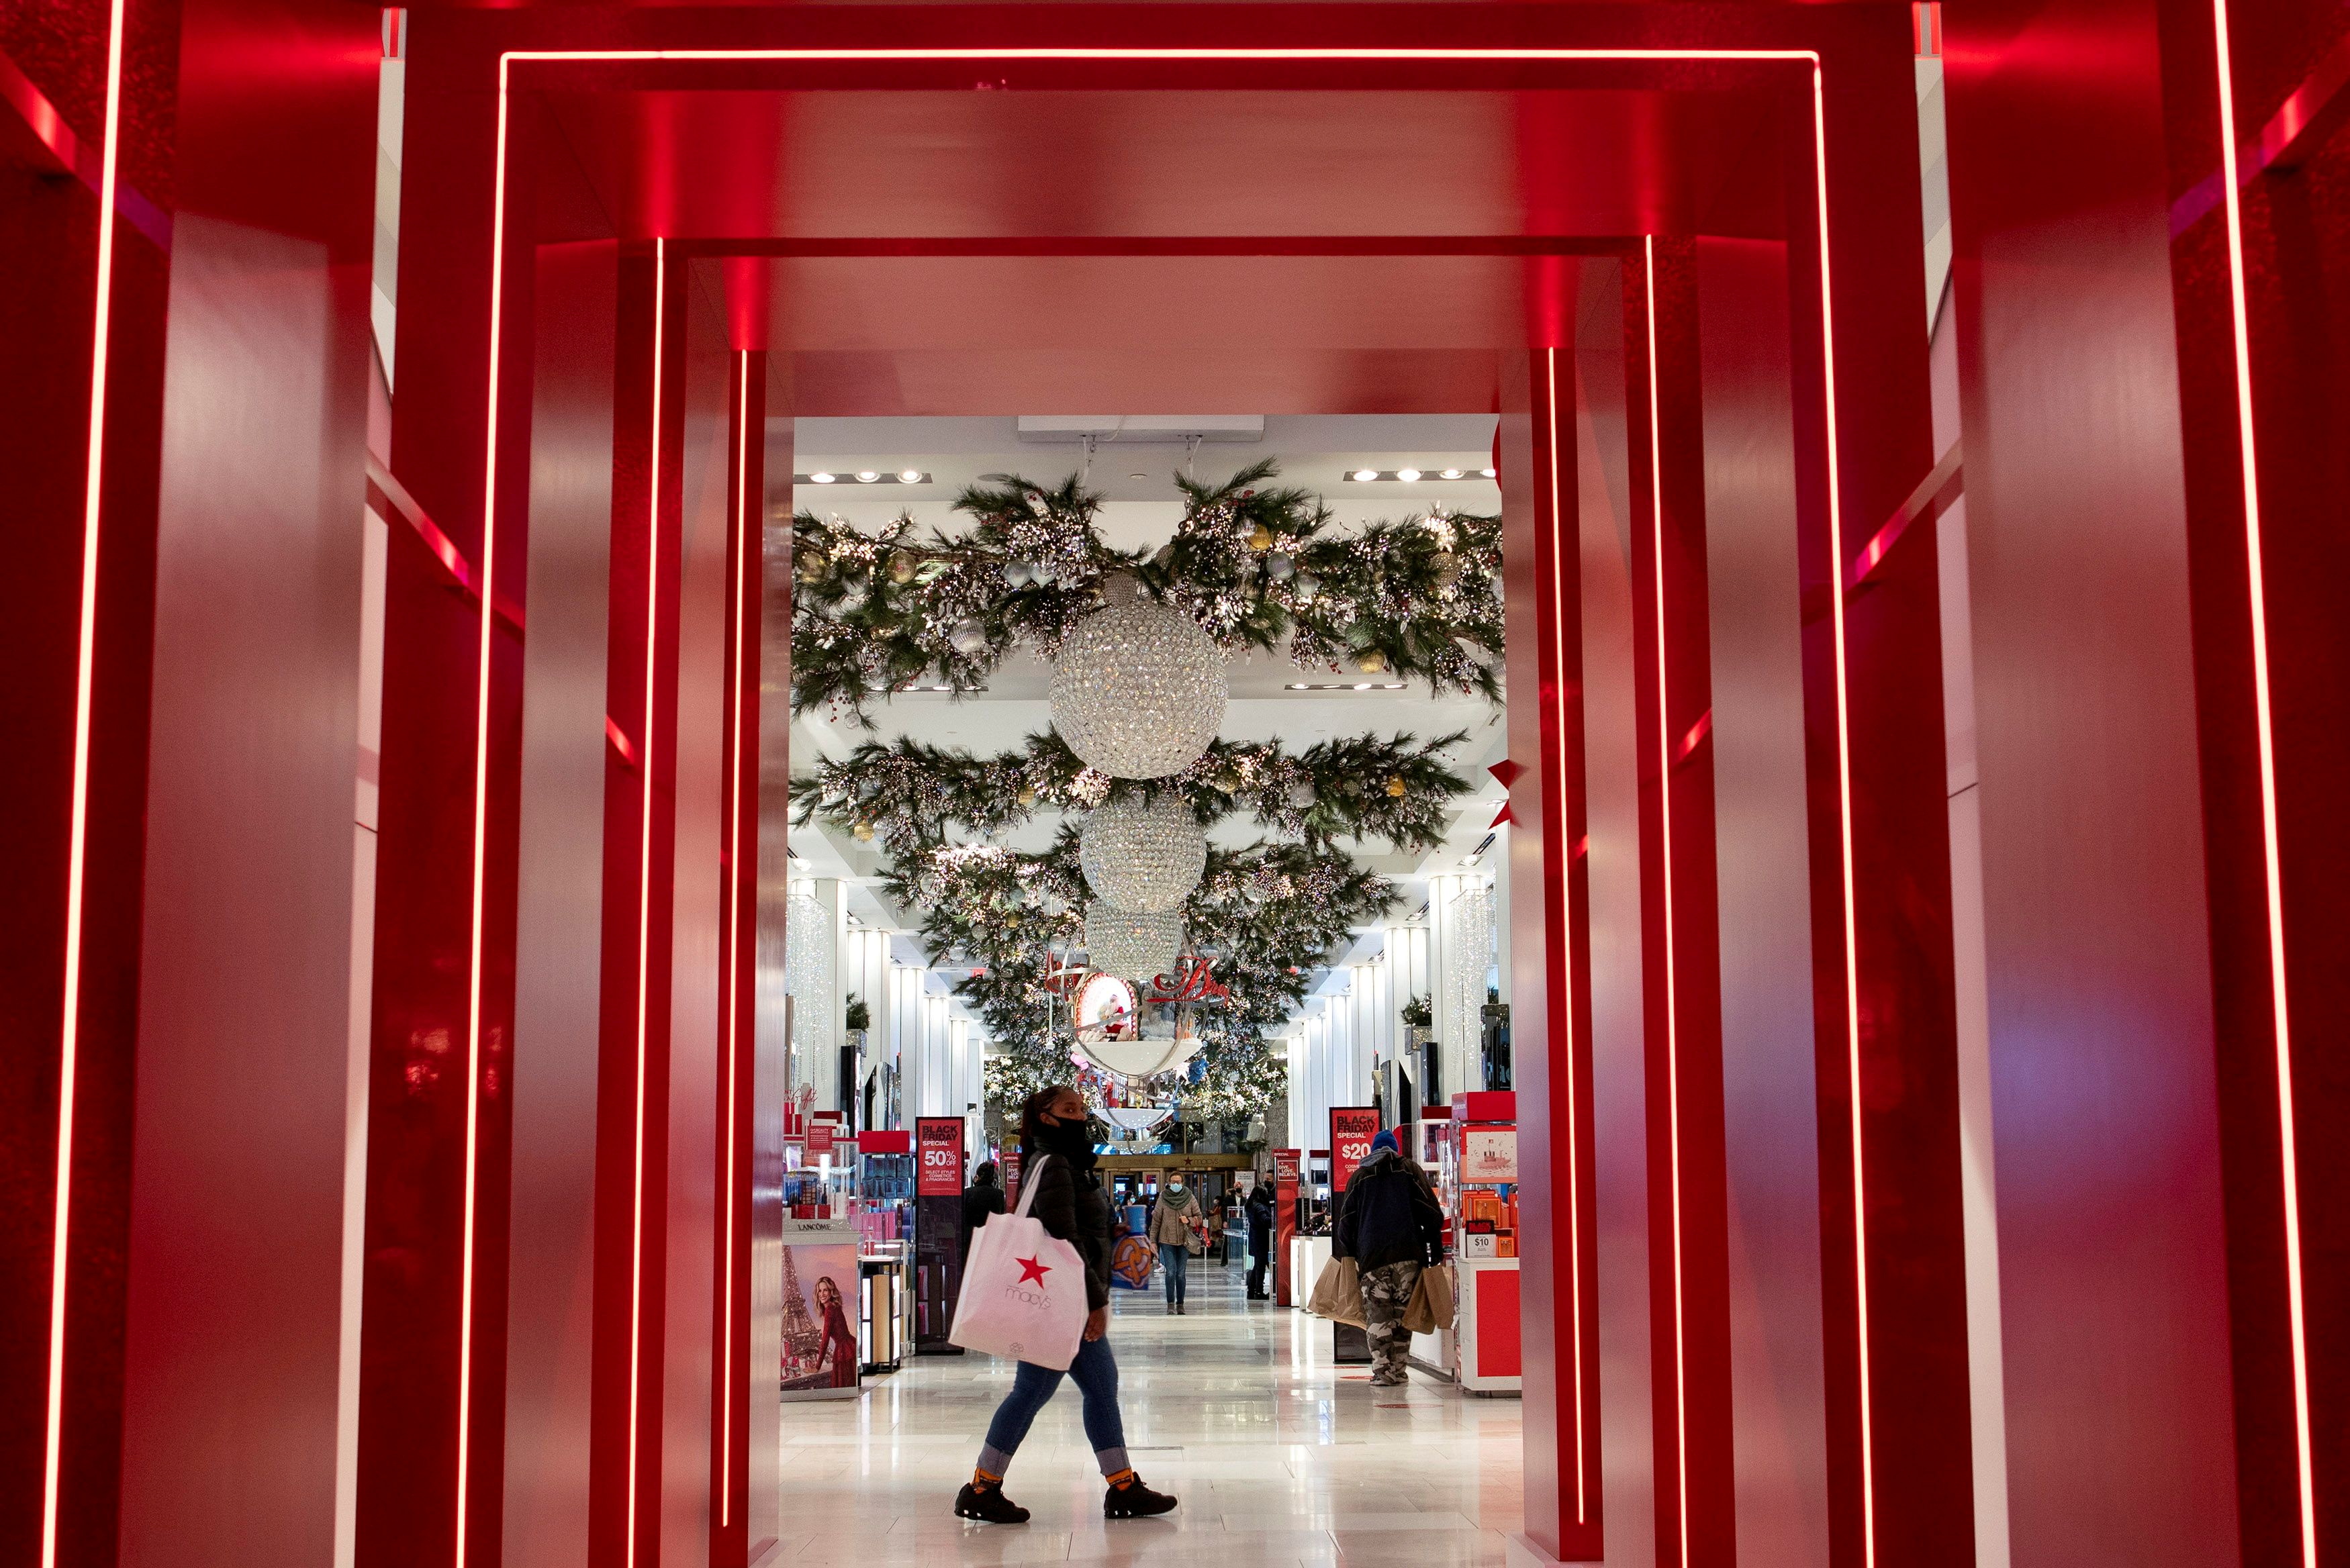 People visit Macy's Herald Square during early opening for the Black Friday sales in Manhattan, New York